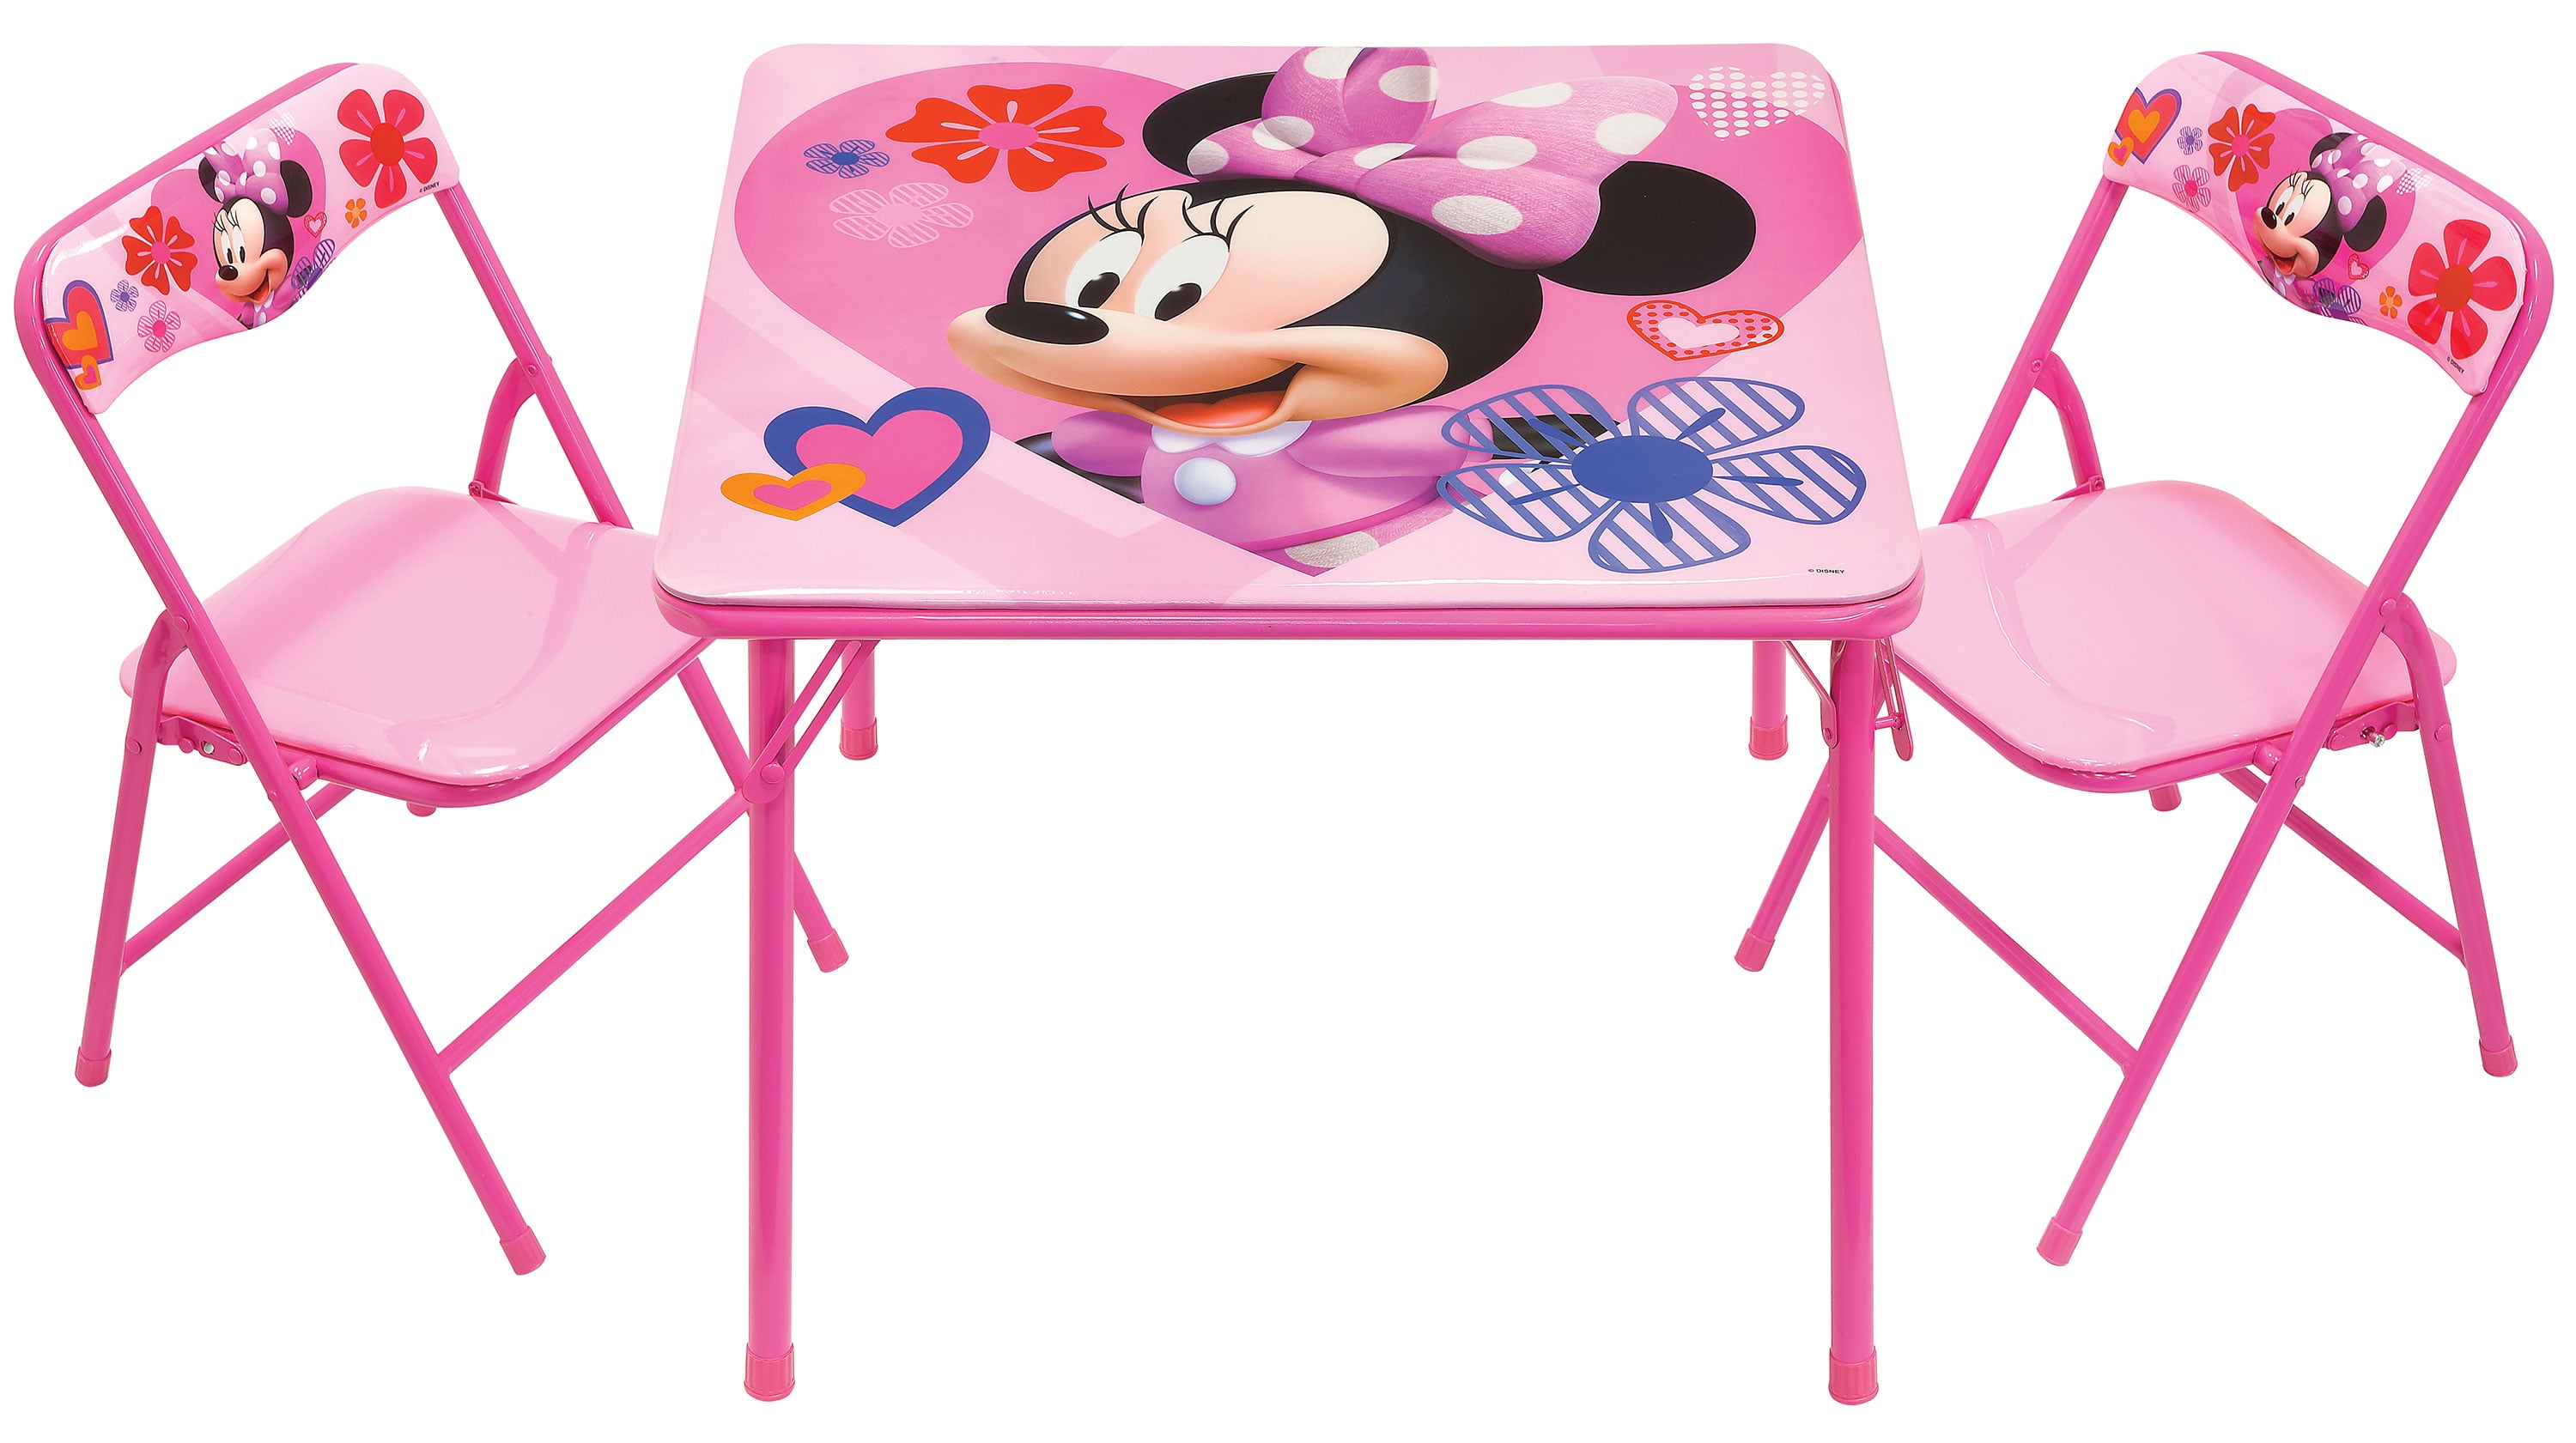 minnie mouse table and chairs amazon